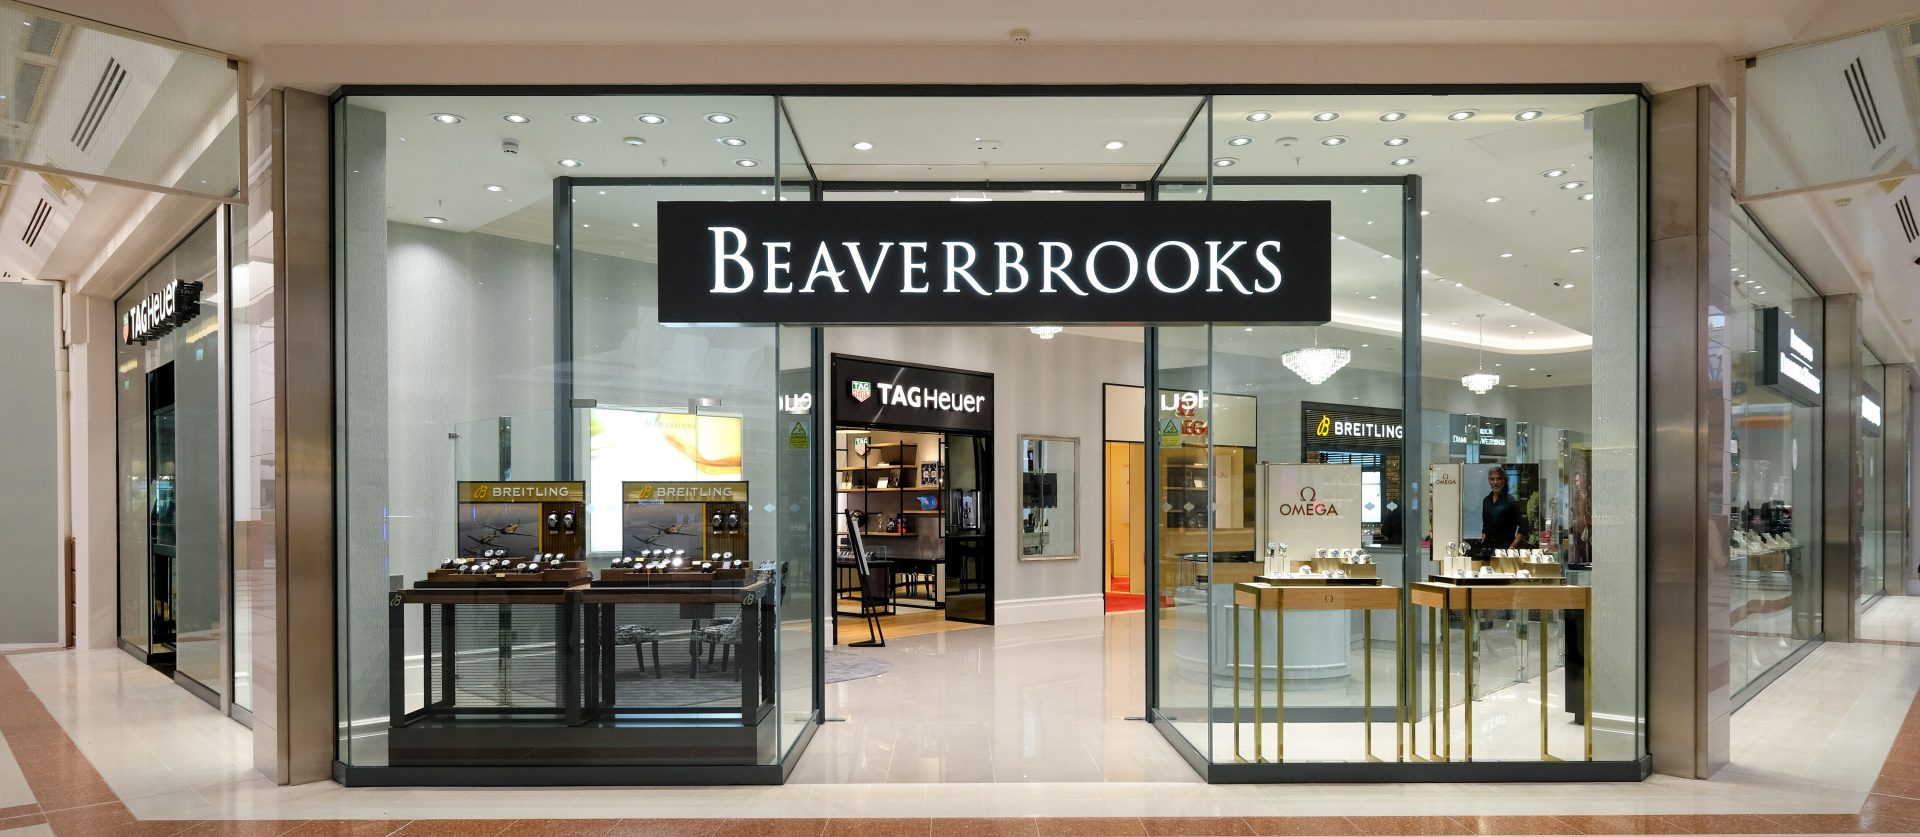 Beaverbrooks Invests Almost £2 Million In Cambridge And Merry Hill ...